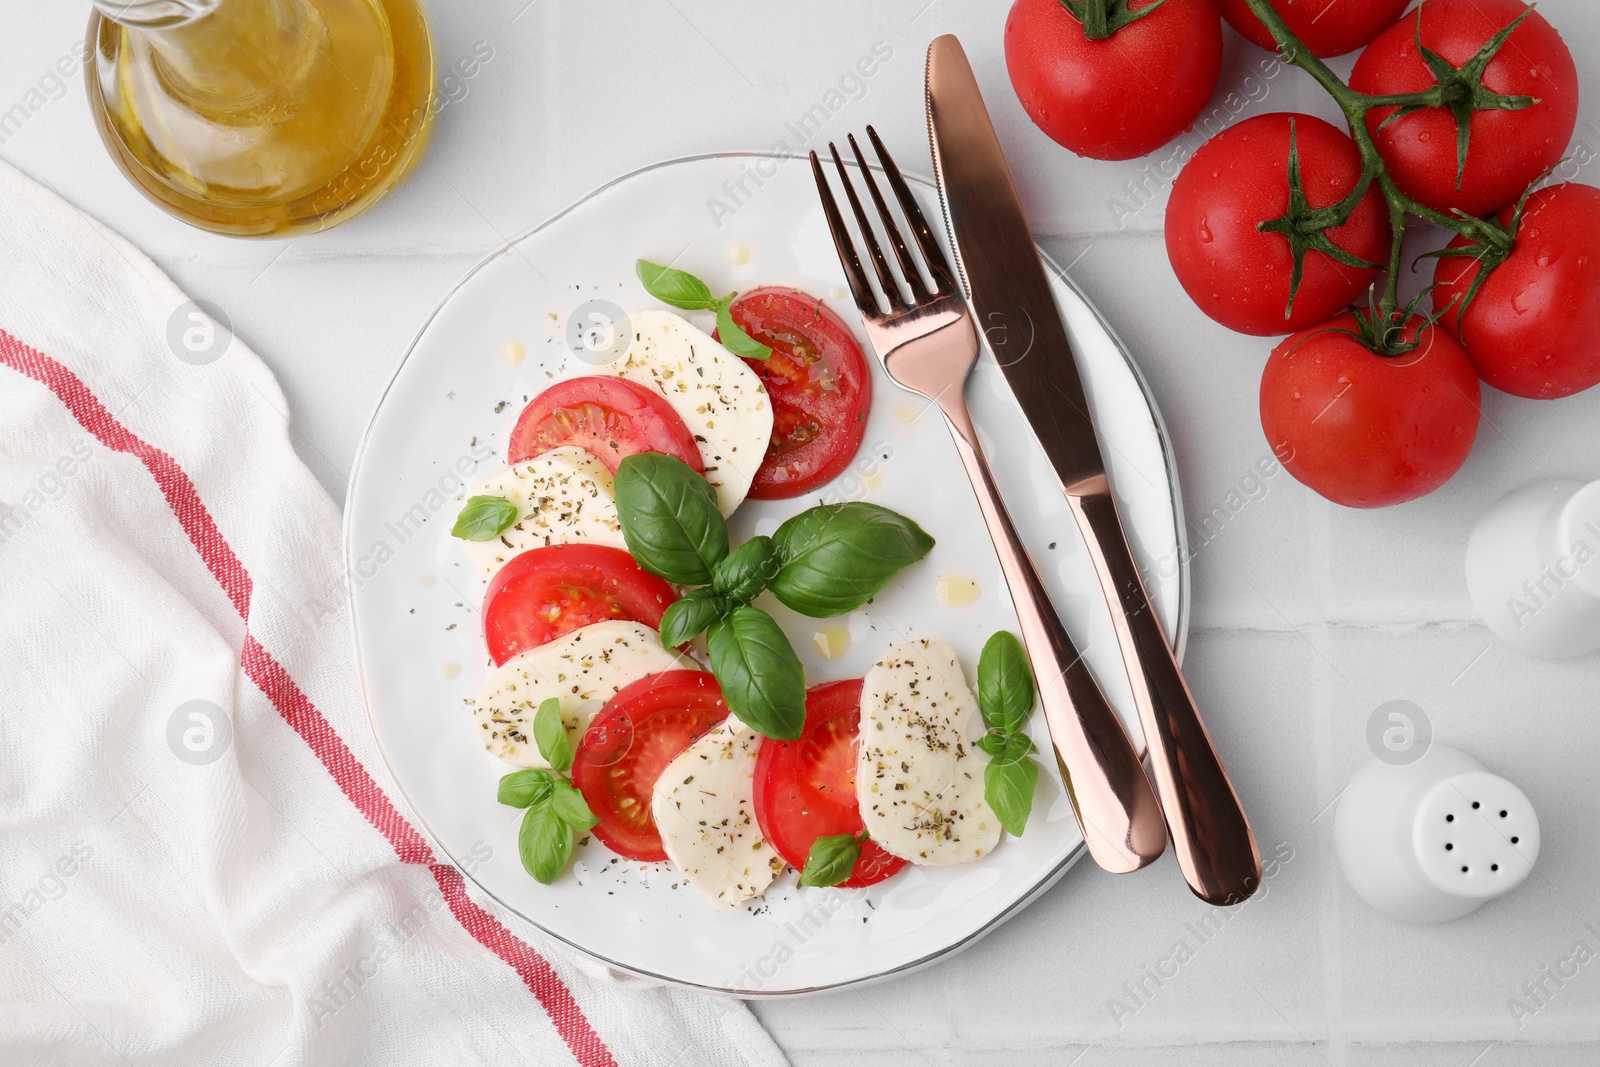 Photo of Caprese salad with tomatoes, mozzarella, basil and spices served on white tiled table, flat lay